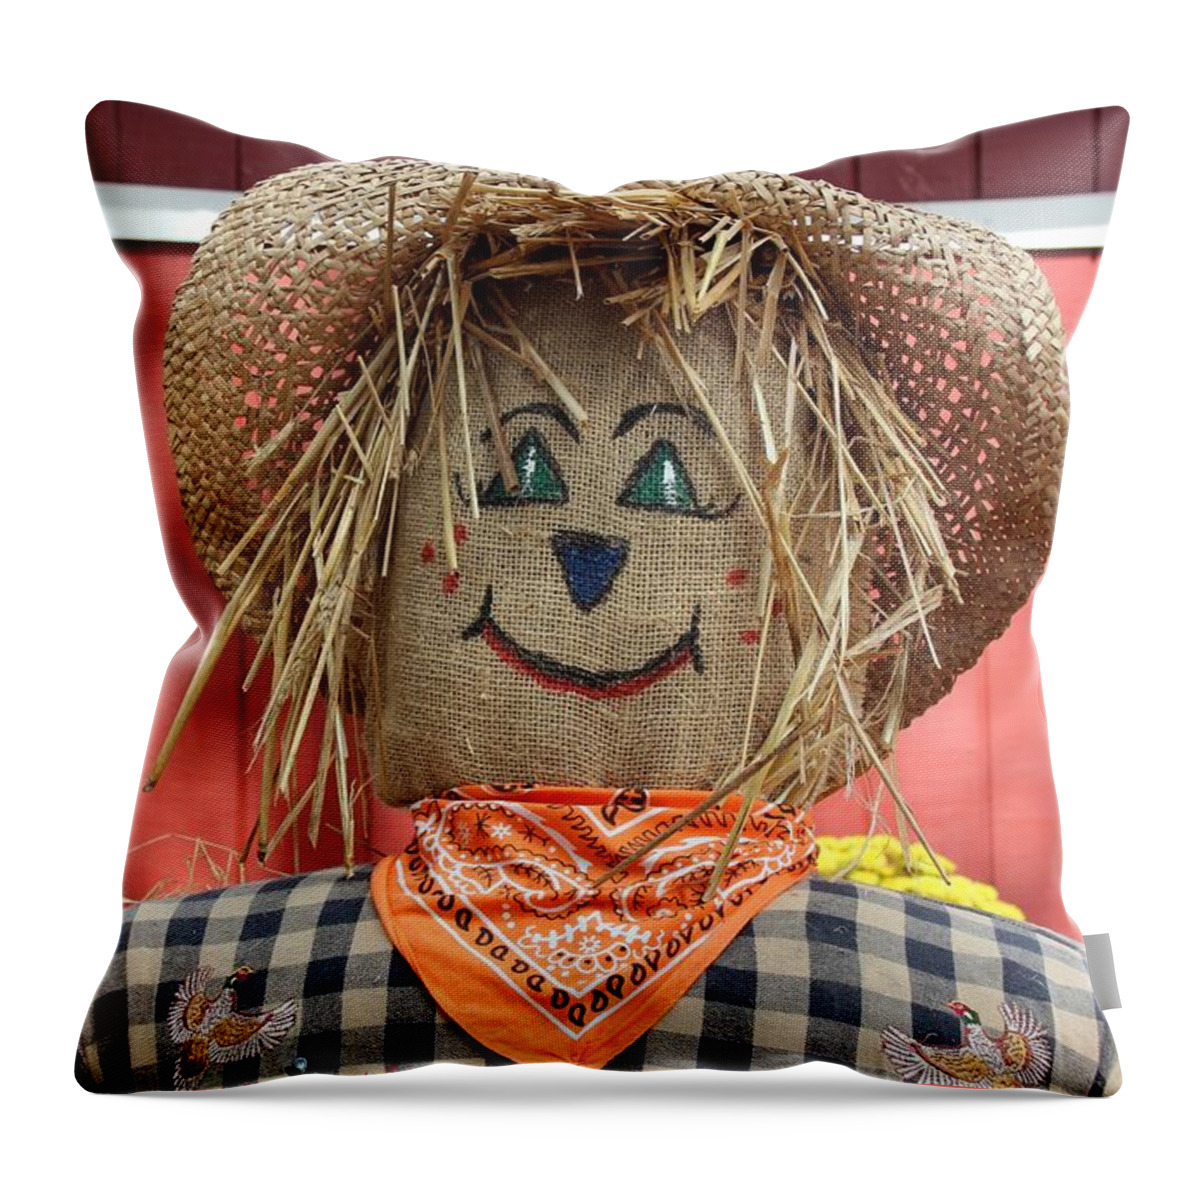 Photo For Sale Throw Pillow featuring the photograph Friendly Scarecrow by Robert Wilder Jr